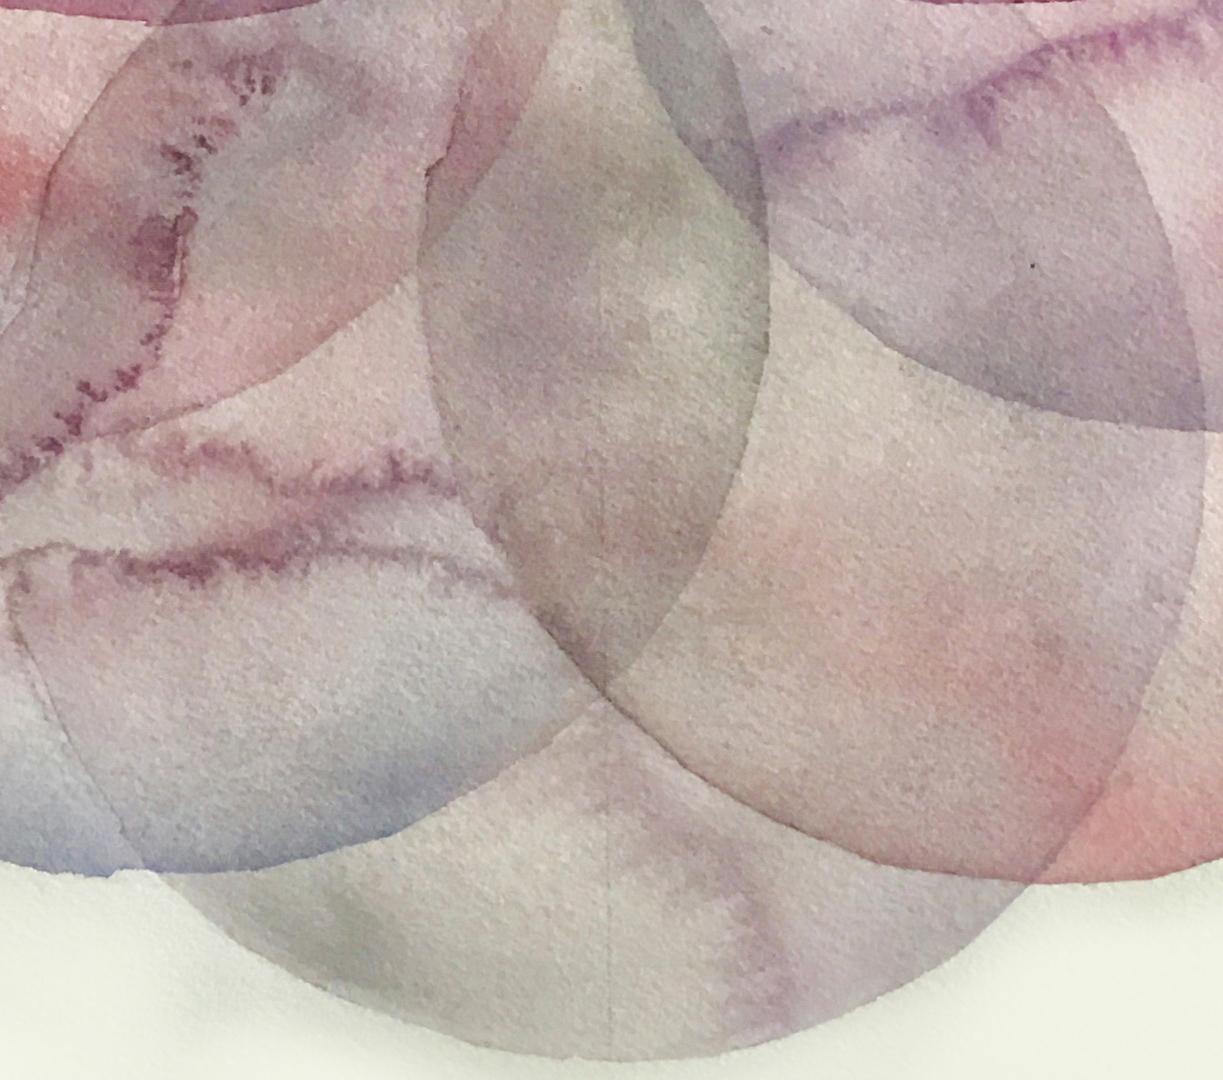 Clare Asch’s “Convergence 12” is part of her series of watercolors consisting of overlapping, transparent circles that explore the interaction of geometry vs. spontaneous paint and gesture. The colors of this painting are made up of pearly, pink